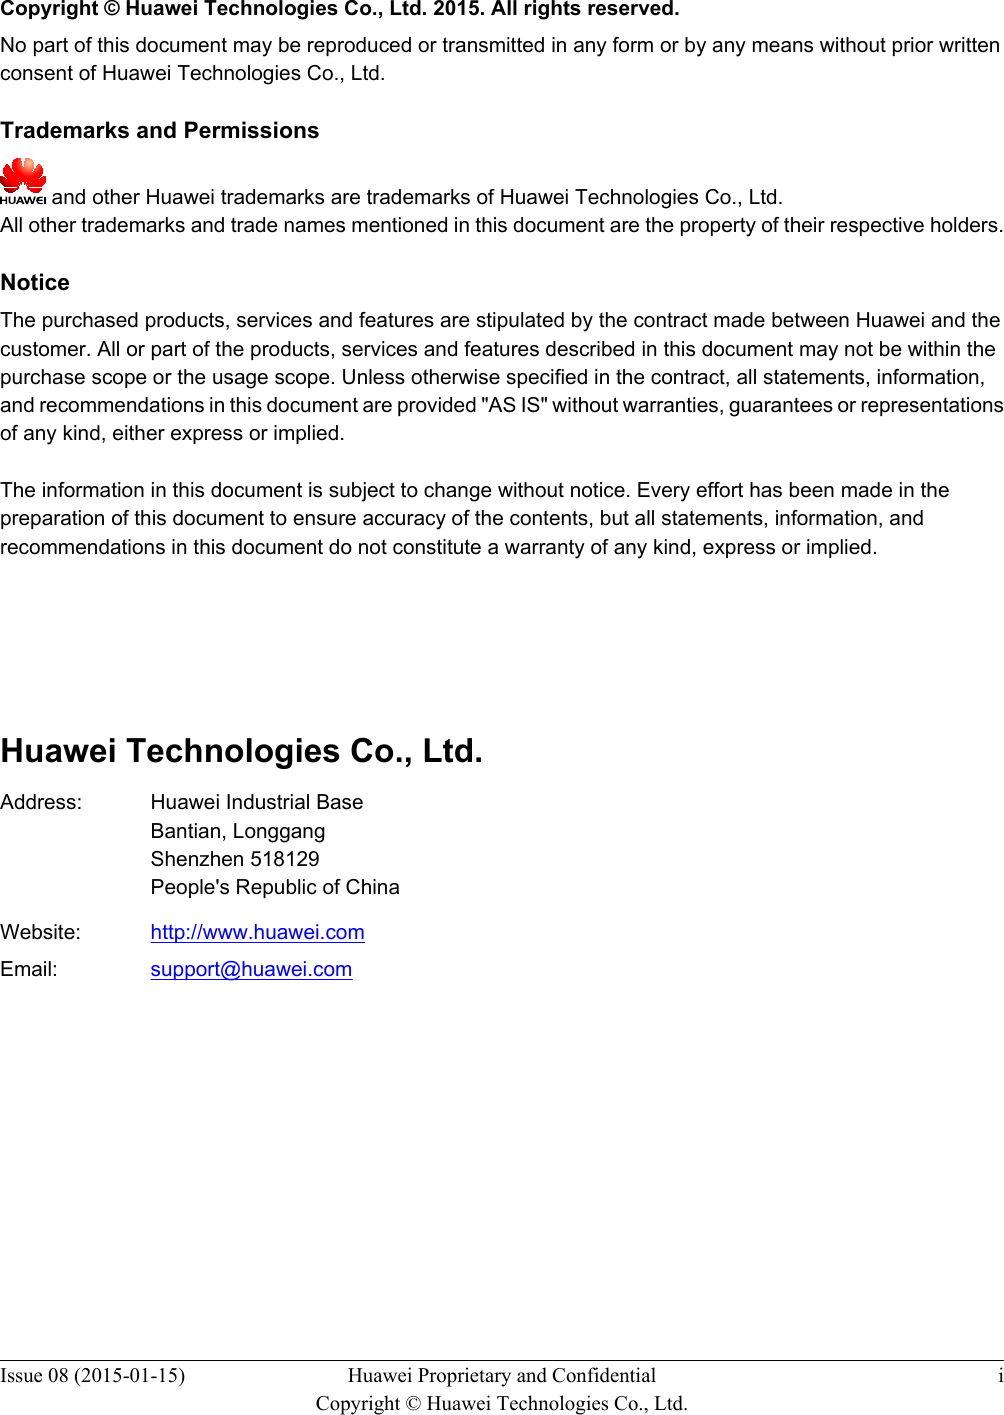   Copyright © Huawei Technologies Co., Ltd. 2015. All rights reserved.No part of this document may be reproduced or transmitted in any form or by any means without prior writtenconsent of Huawei Technologies Co., Ltd. Trademarks and Permissions and other Huawei trademarks are trademarks of Huawei Technologies Co., Ltd.All other trademarks and trade names mentioned in this document are the property of their respective holders. NoticeThe purchased products, services and features are stipulated by the contract made between Huawei and thecustomer. All or part of the products, services and features described in this document may not be within thepurchase scope or the usage scope. Unless otherwise specified in the contract, all statements, information,and recommendations in this document are provided &quot;AS IS&quot; without warranties, guarantees or representationsof any kind, either express or implied.The information in this document is subject to change without notice. Every effort has been made in thepreparation of this document to ensure accuracy of the contents, but all statements, information, andrecommendations in this document do not constitute a warranty of any kind, express or implied.       Huawei Technologies Co., Ltd.Address: Huawei Industrial BaseBantian, LonggangShenzhen 518129People&apos;s Republic of ChinaWebsite: http://www.huawei.comEmail: support@huawei.comIssue 08 (2015-01-15) Huawei Proprietary and ConfidentialCopyright © Huawei Technologies Co., Ltd.i